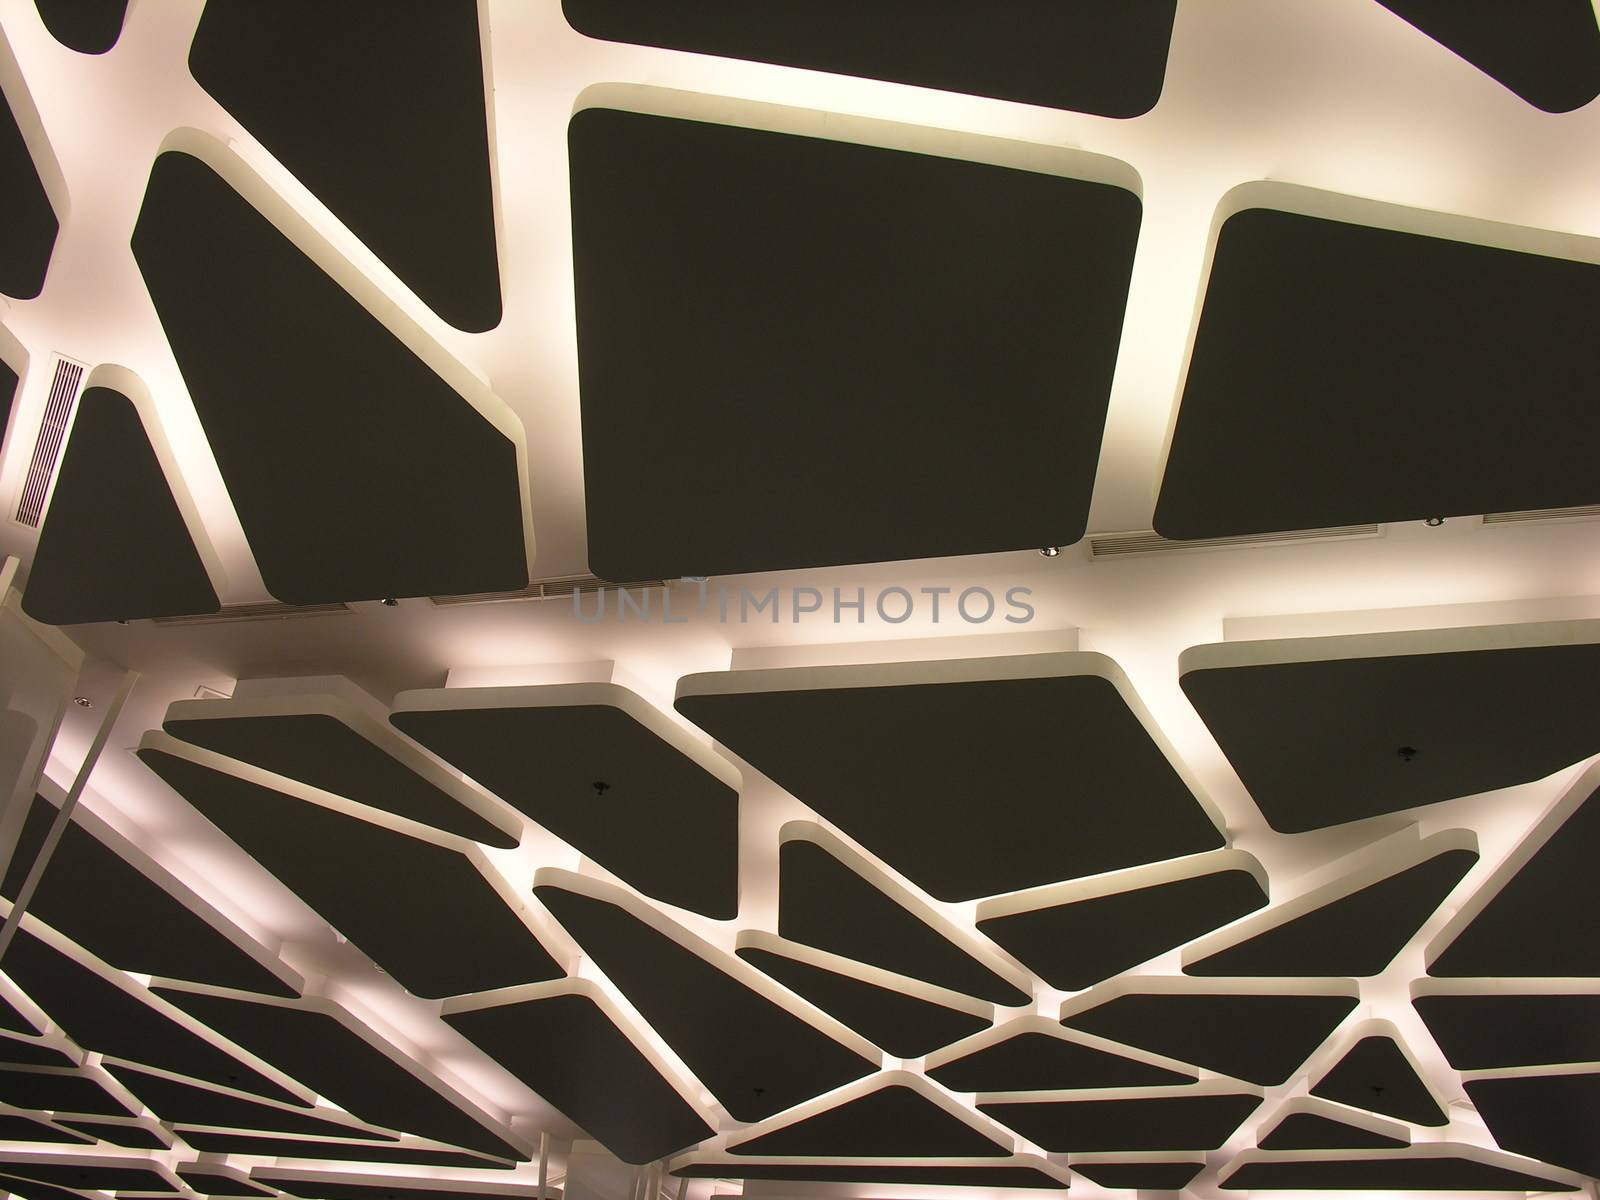 View of a suspended futuristic ceiling with modern lighting by Hepjam